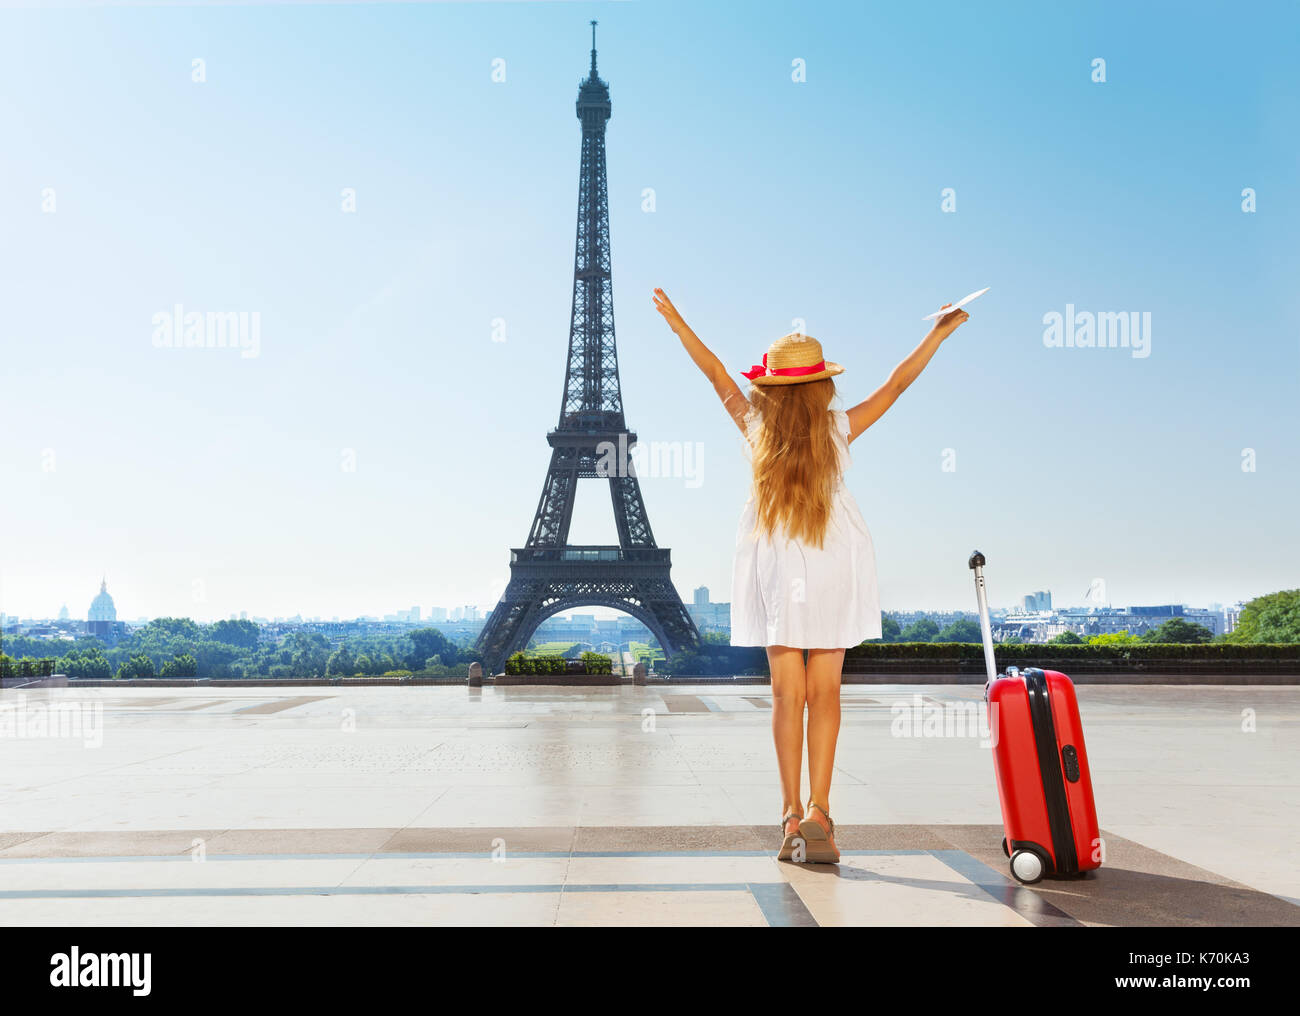 Back view portrait of little girl, wearing straw hat and white dress, looking at the Eiffel Tower with her hands lifted up Stock Photo